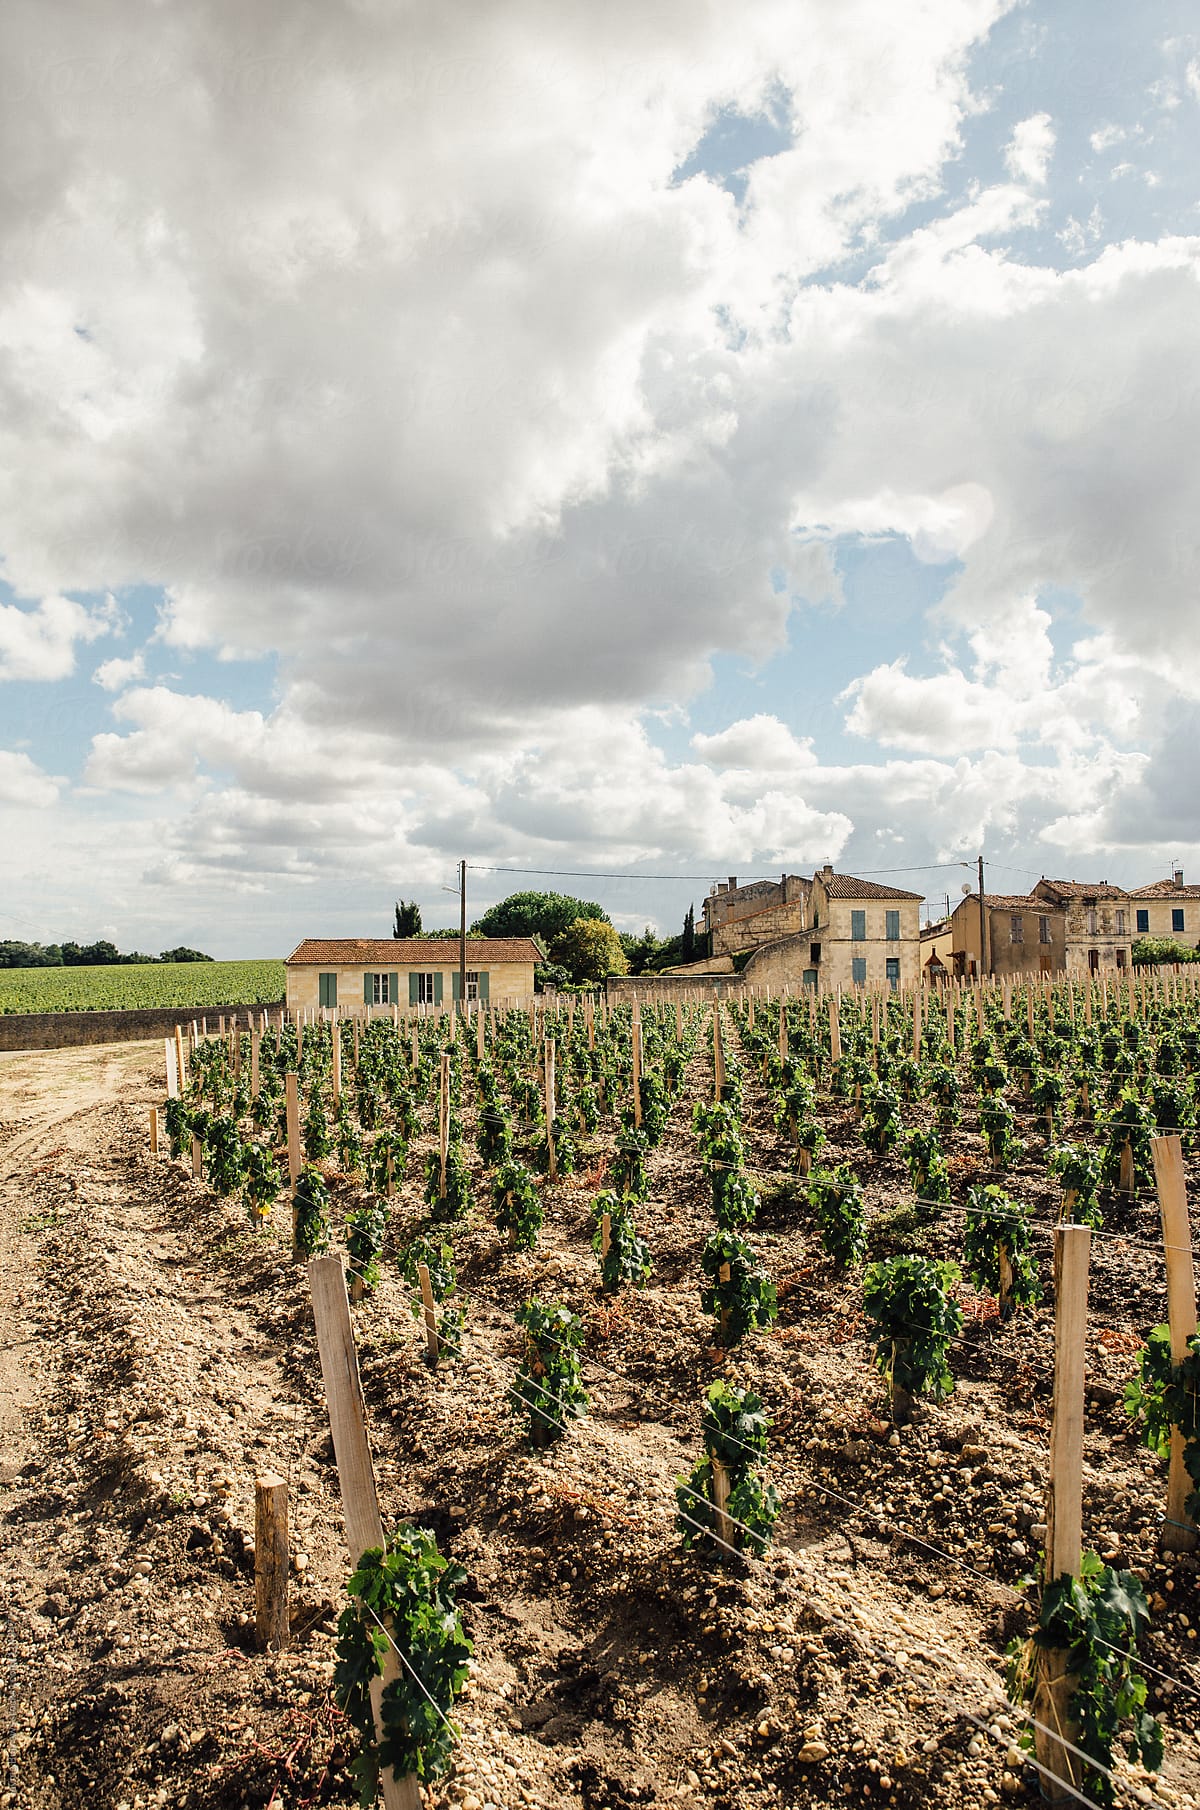 A Partly Cloudy Sky Over a Small Vineyard